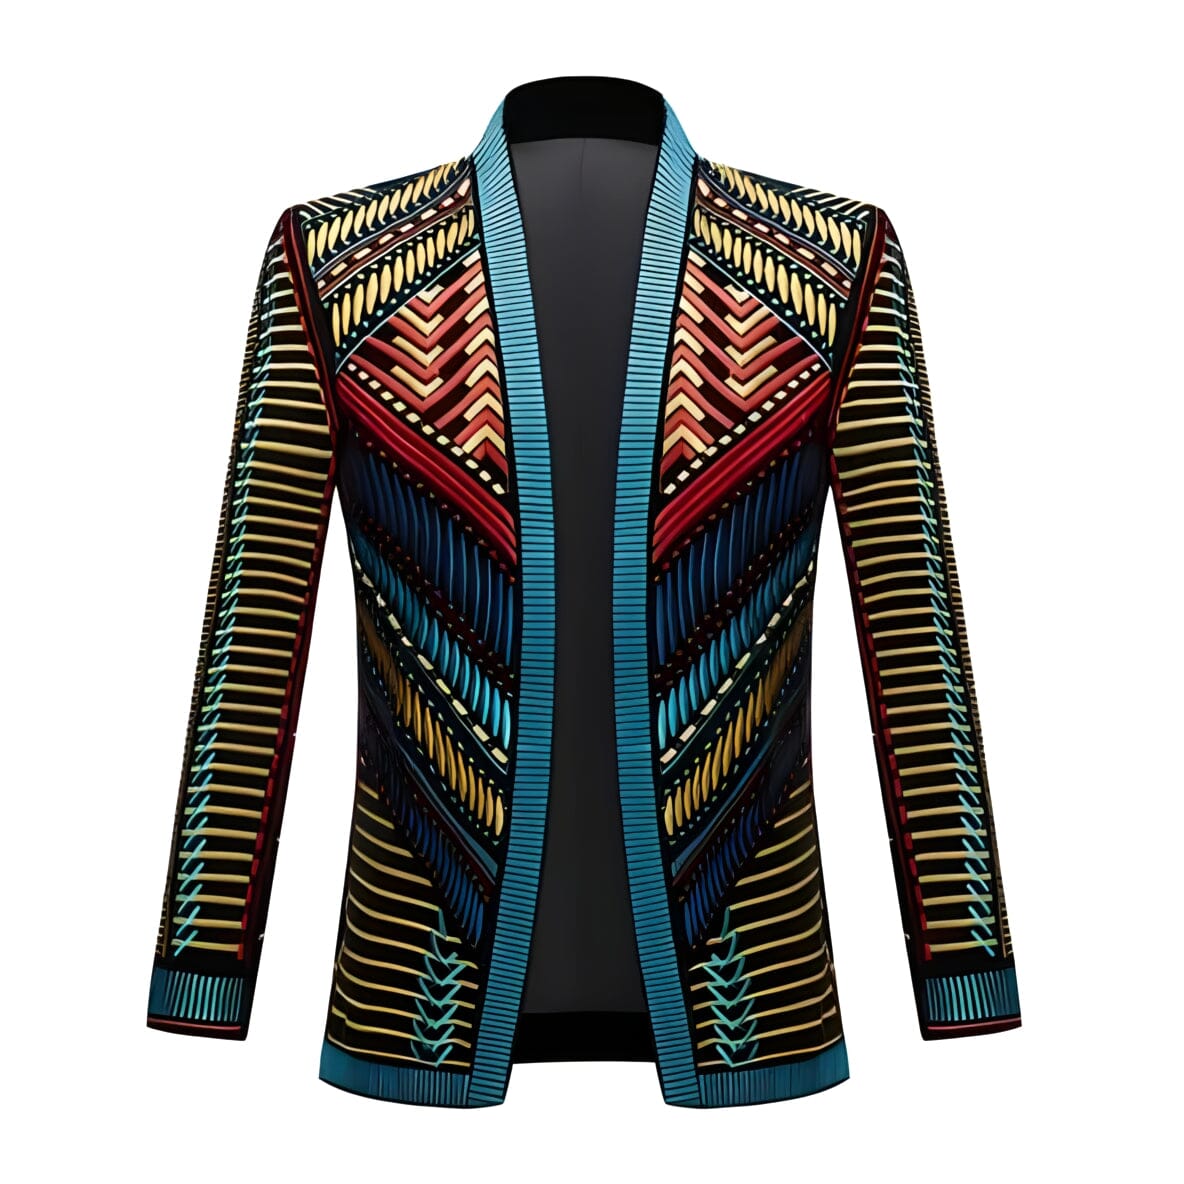 The Zion Embroidered Open Front Jacket William // David XL 44R 